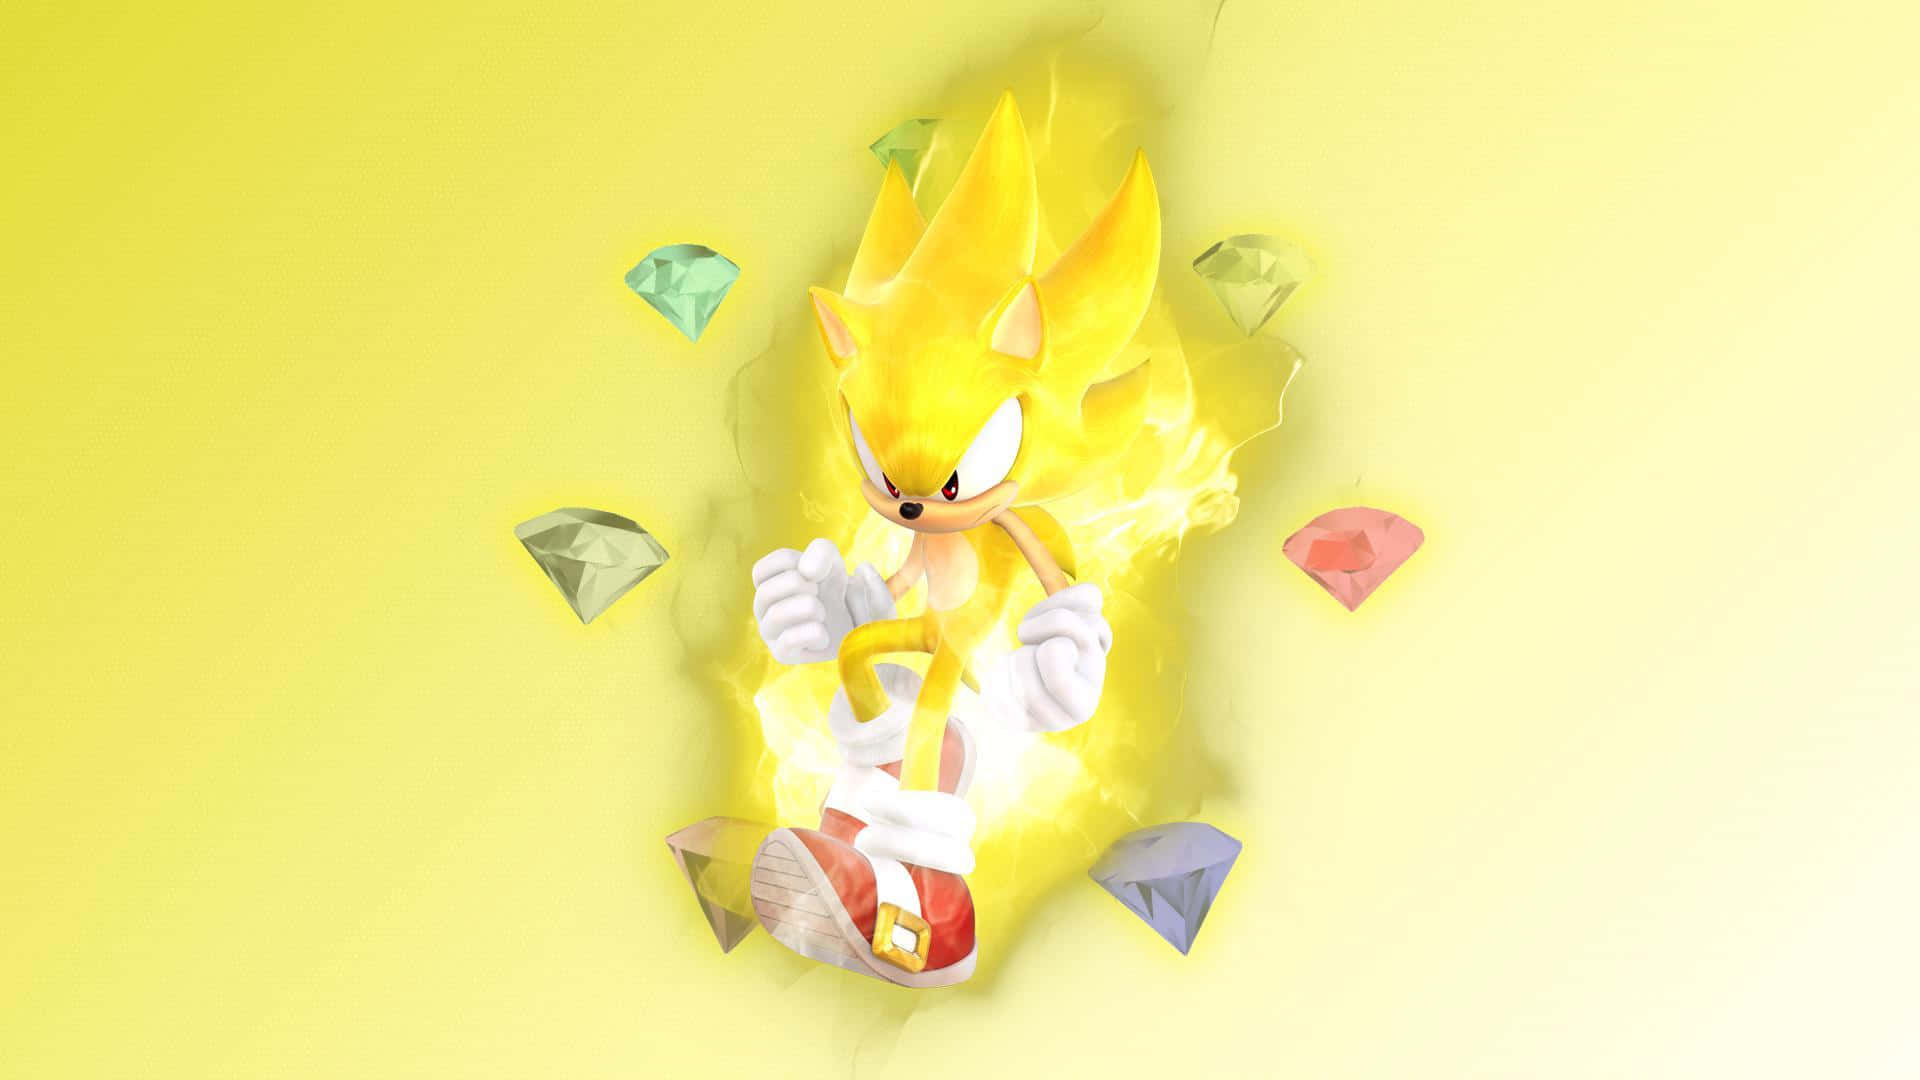 Get ready to blaze the track with Super Sonic!